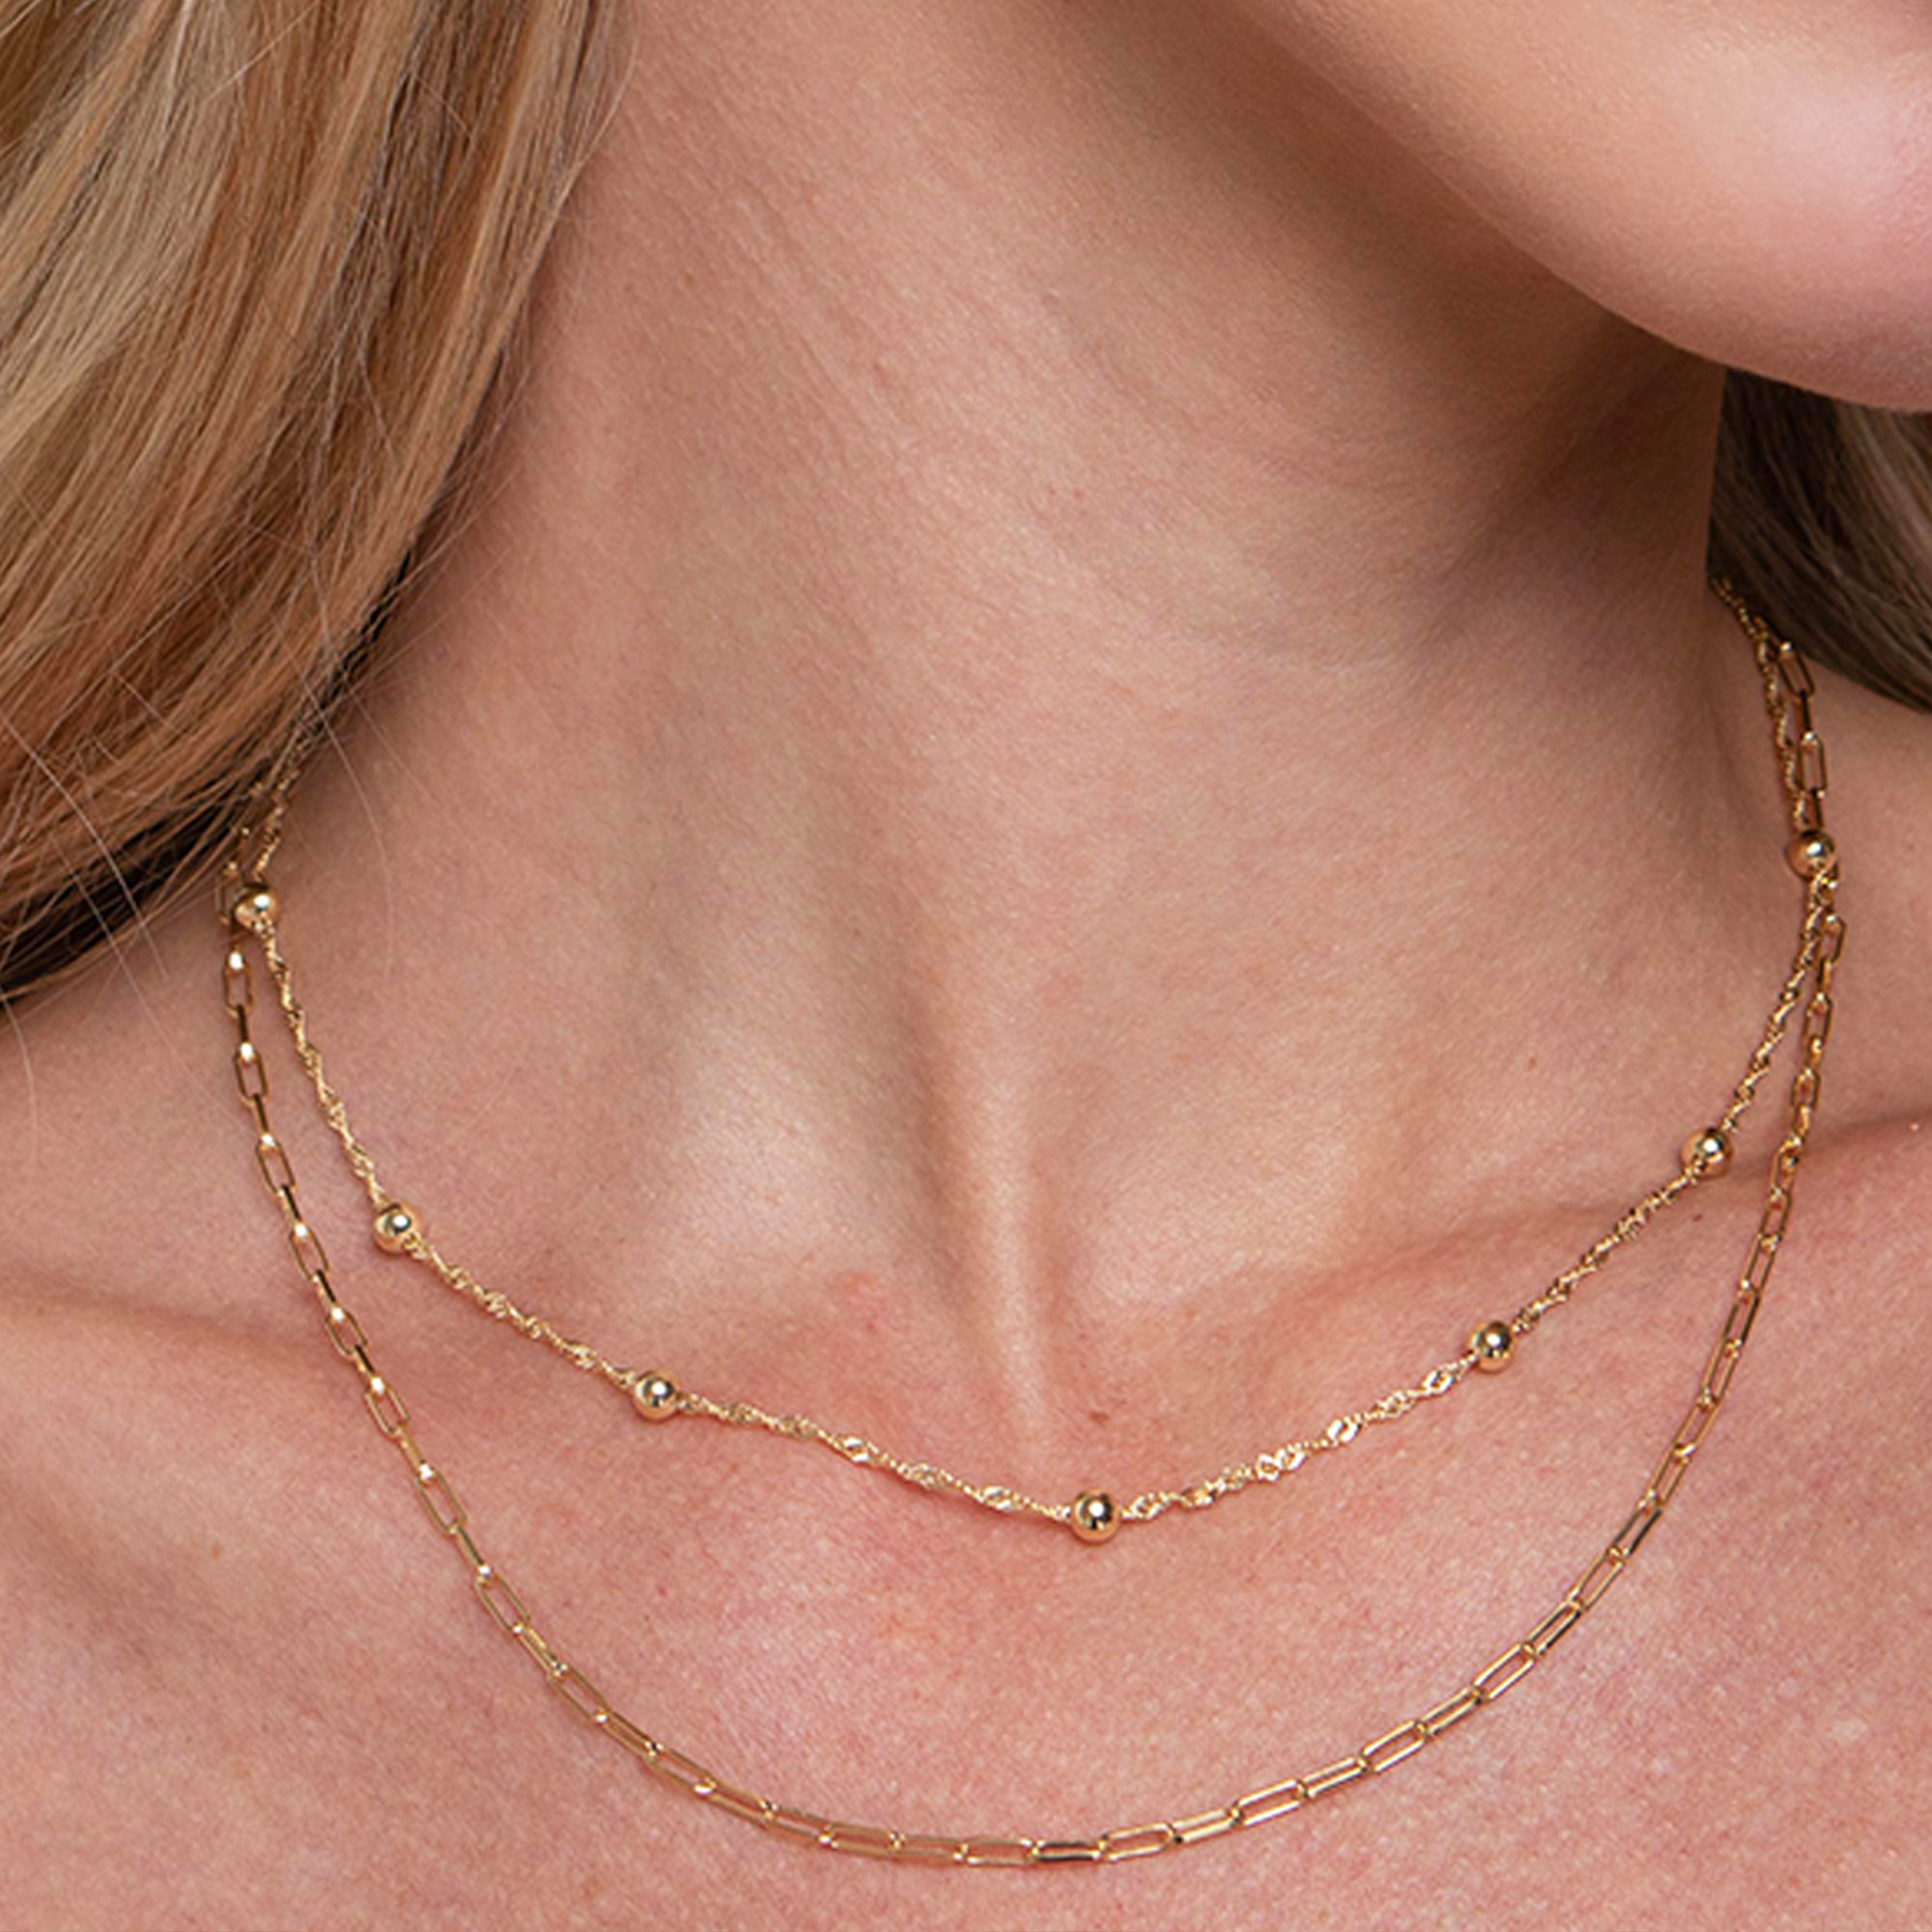 THE THIN PAPERCLIP NECKLACE